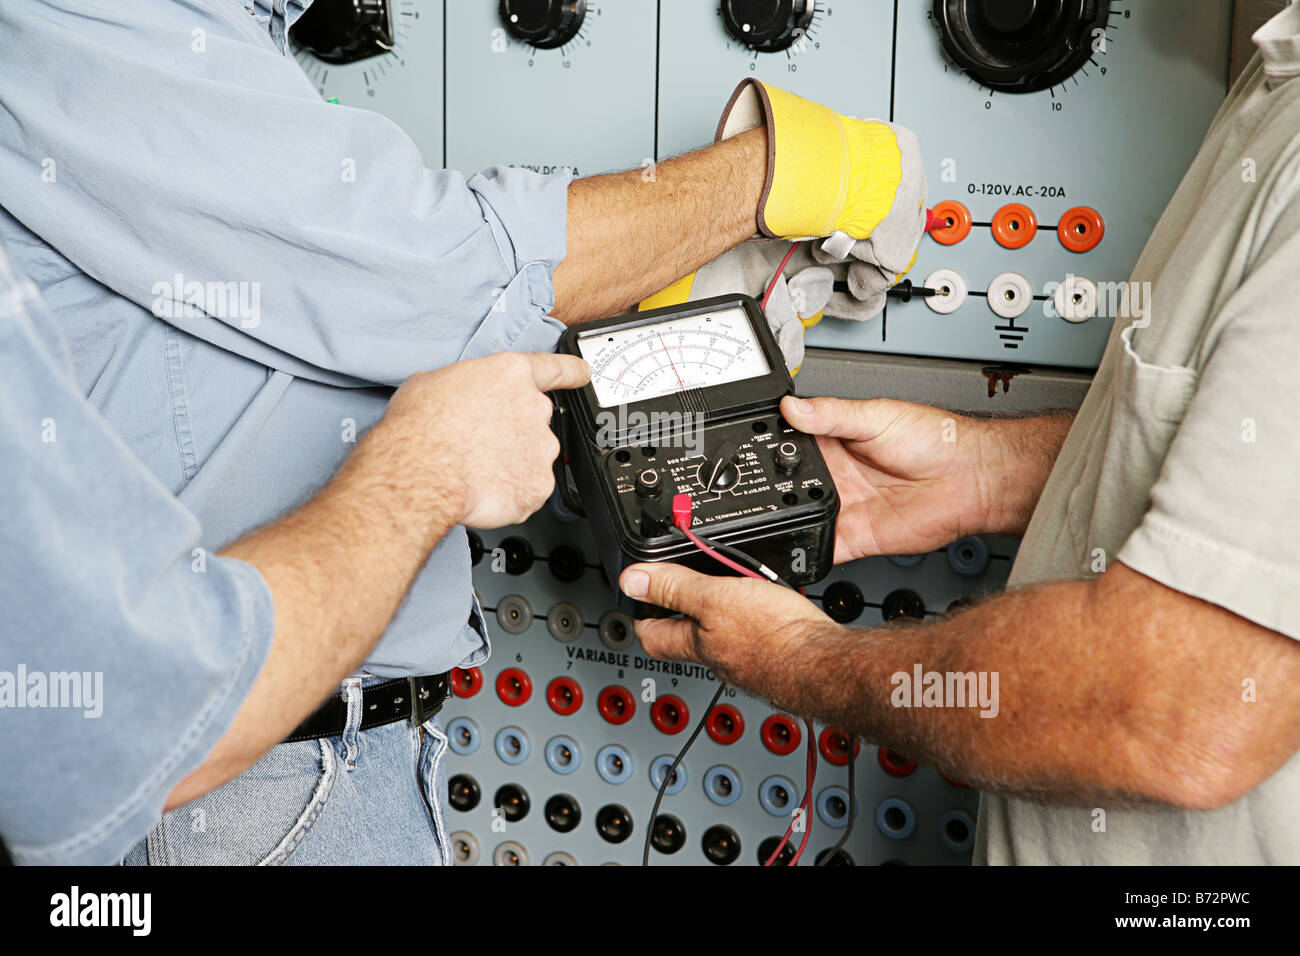 team-of-actual-electricians-testing-the-voltage-on-an-industrial-power-distribution-center-all